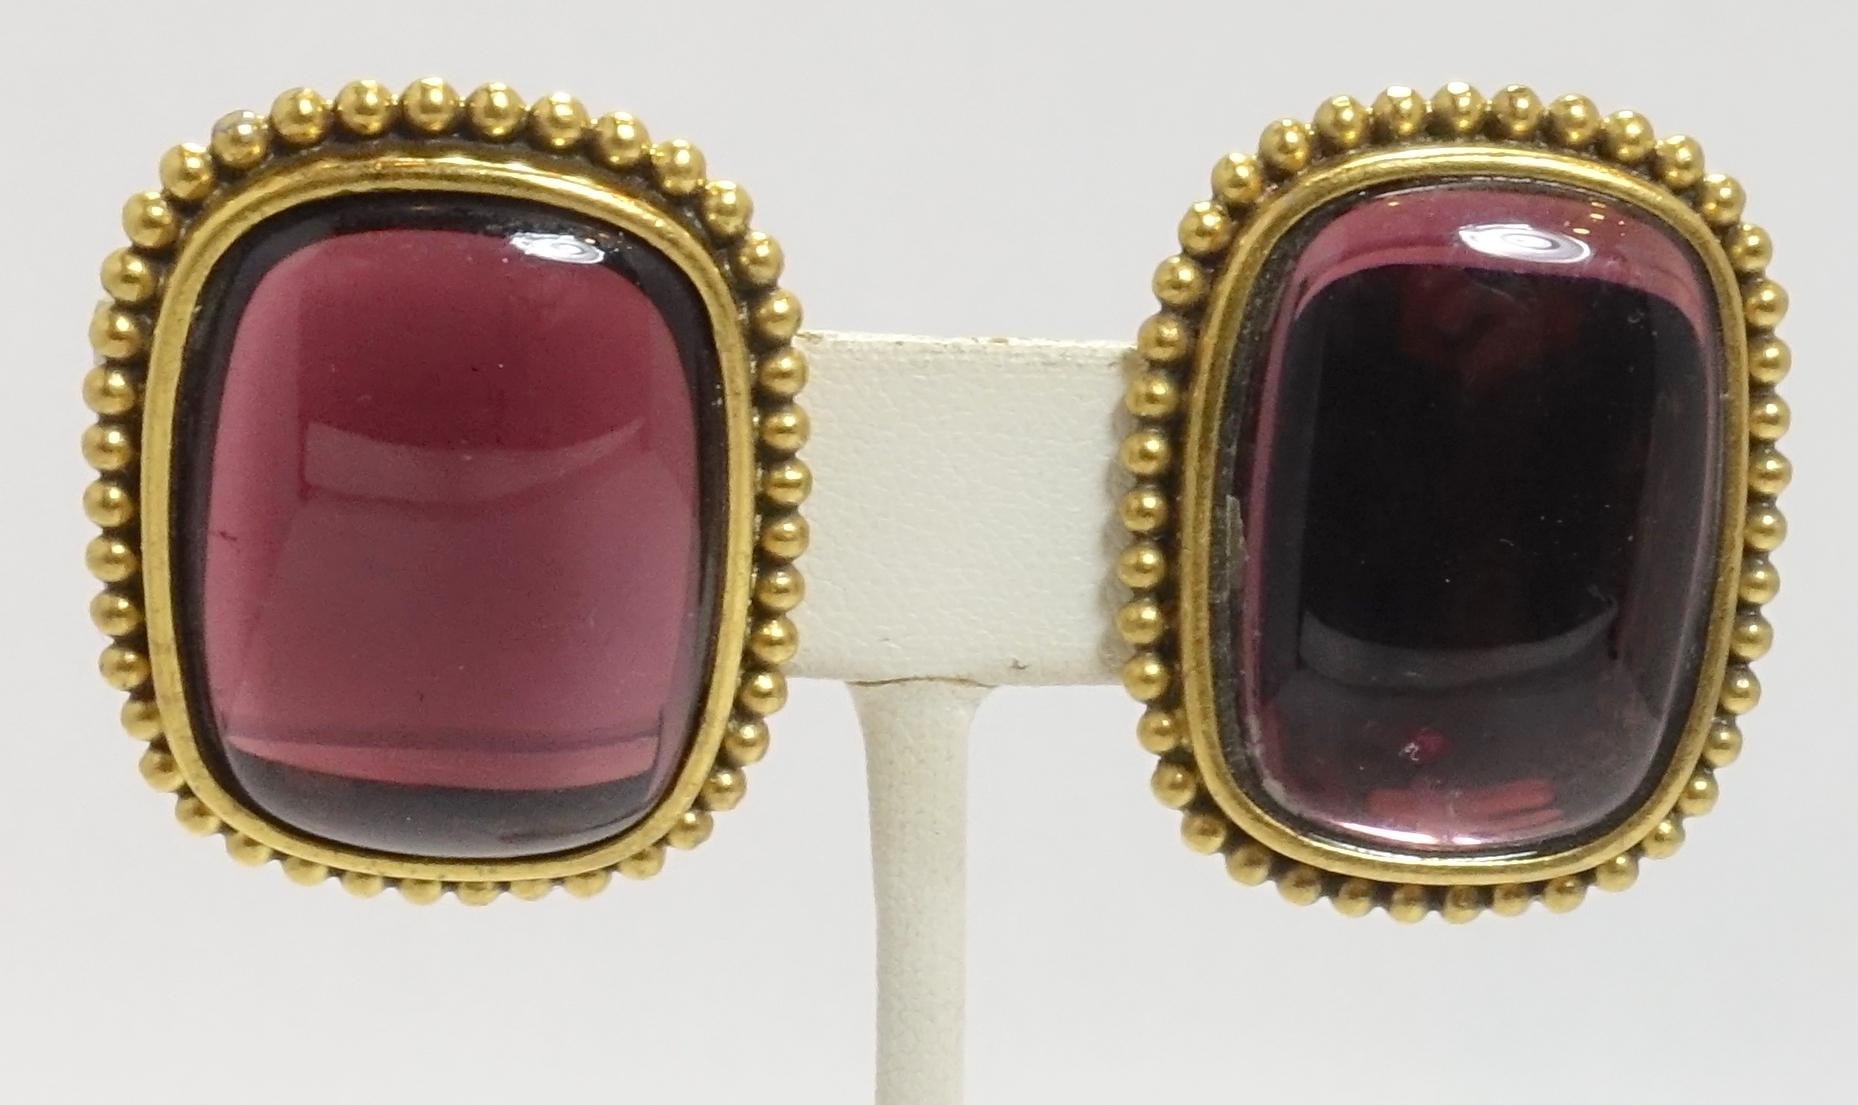 These vintage signed Yves St. Laurent earrings feature amethyst color poured glass in a gold-tone metal setting.  These clip earrings measure 1-3/8” x 1”, are signed “YSL”, and are in excellent condition.